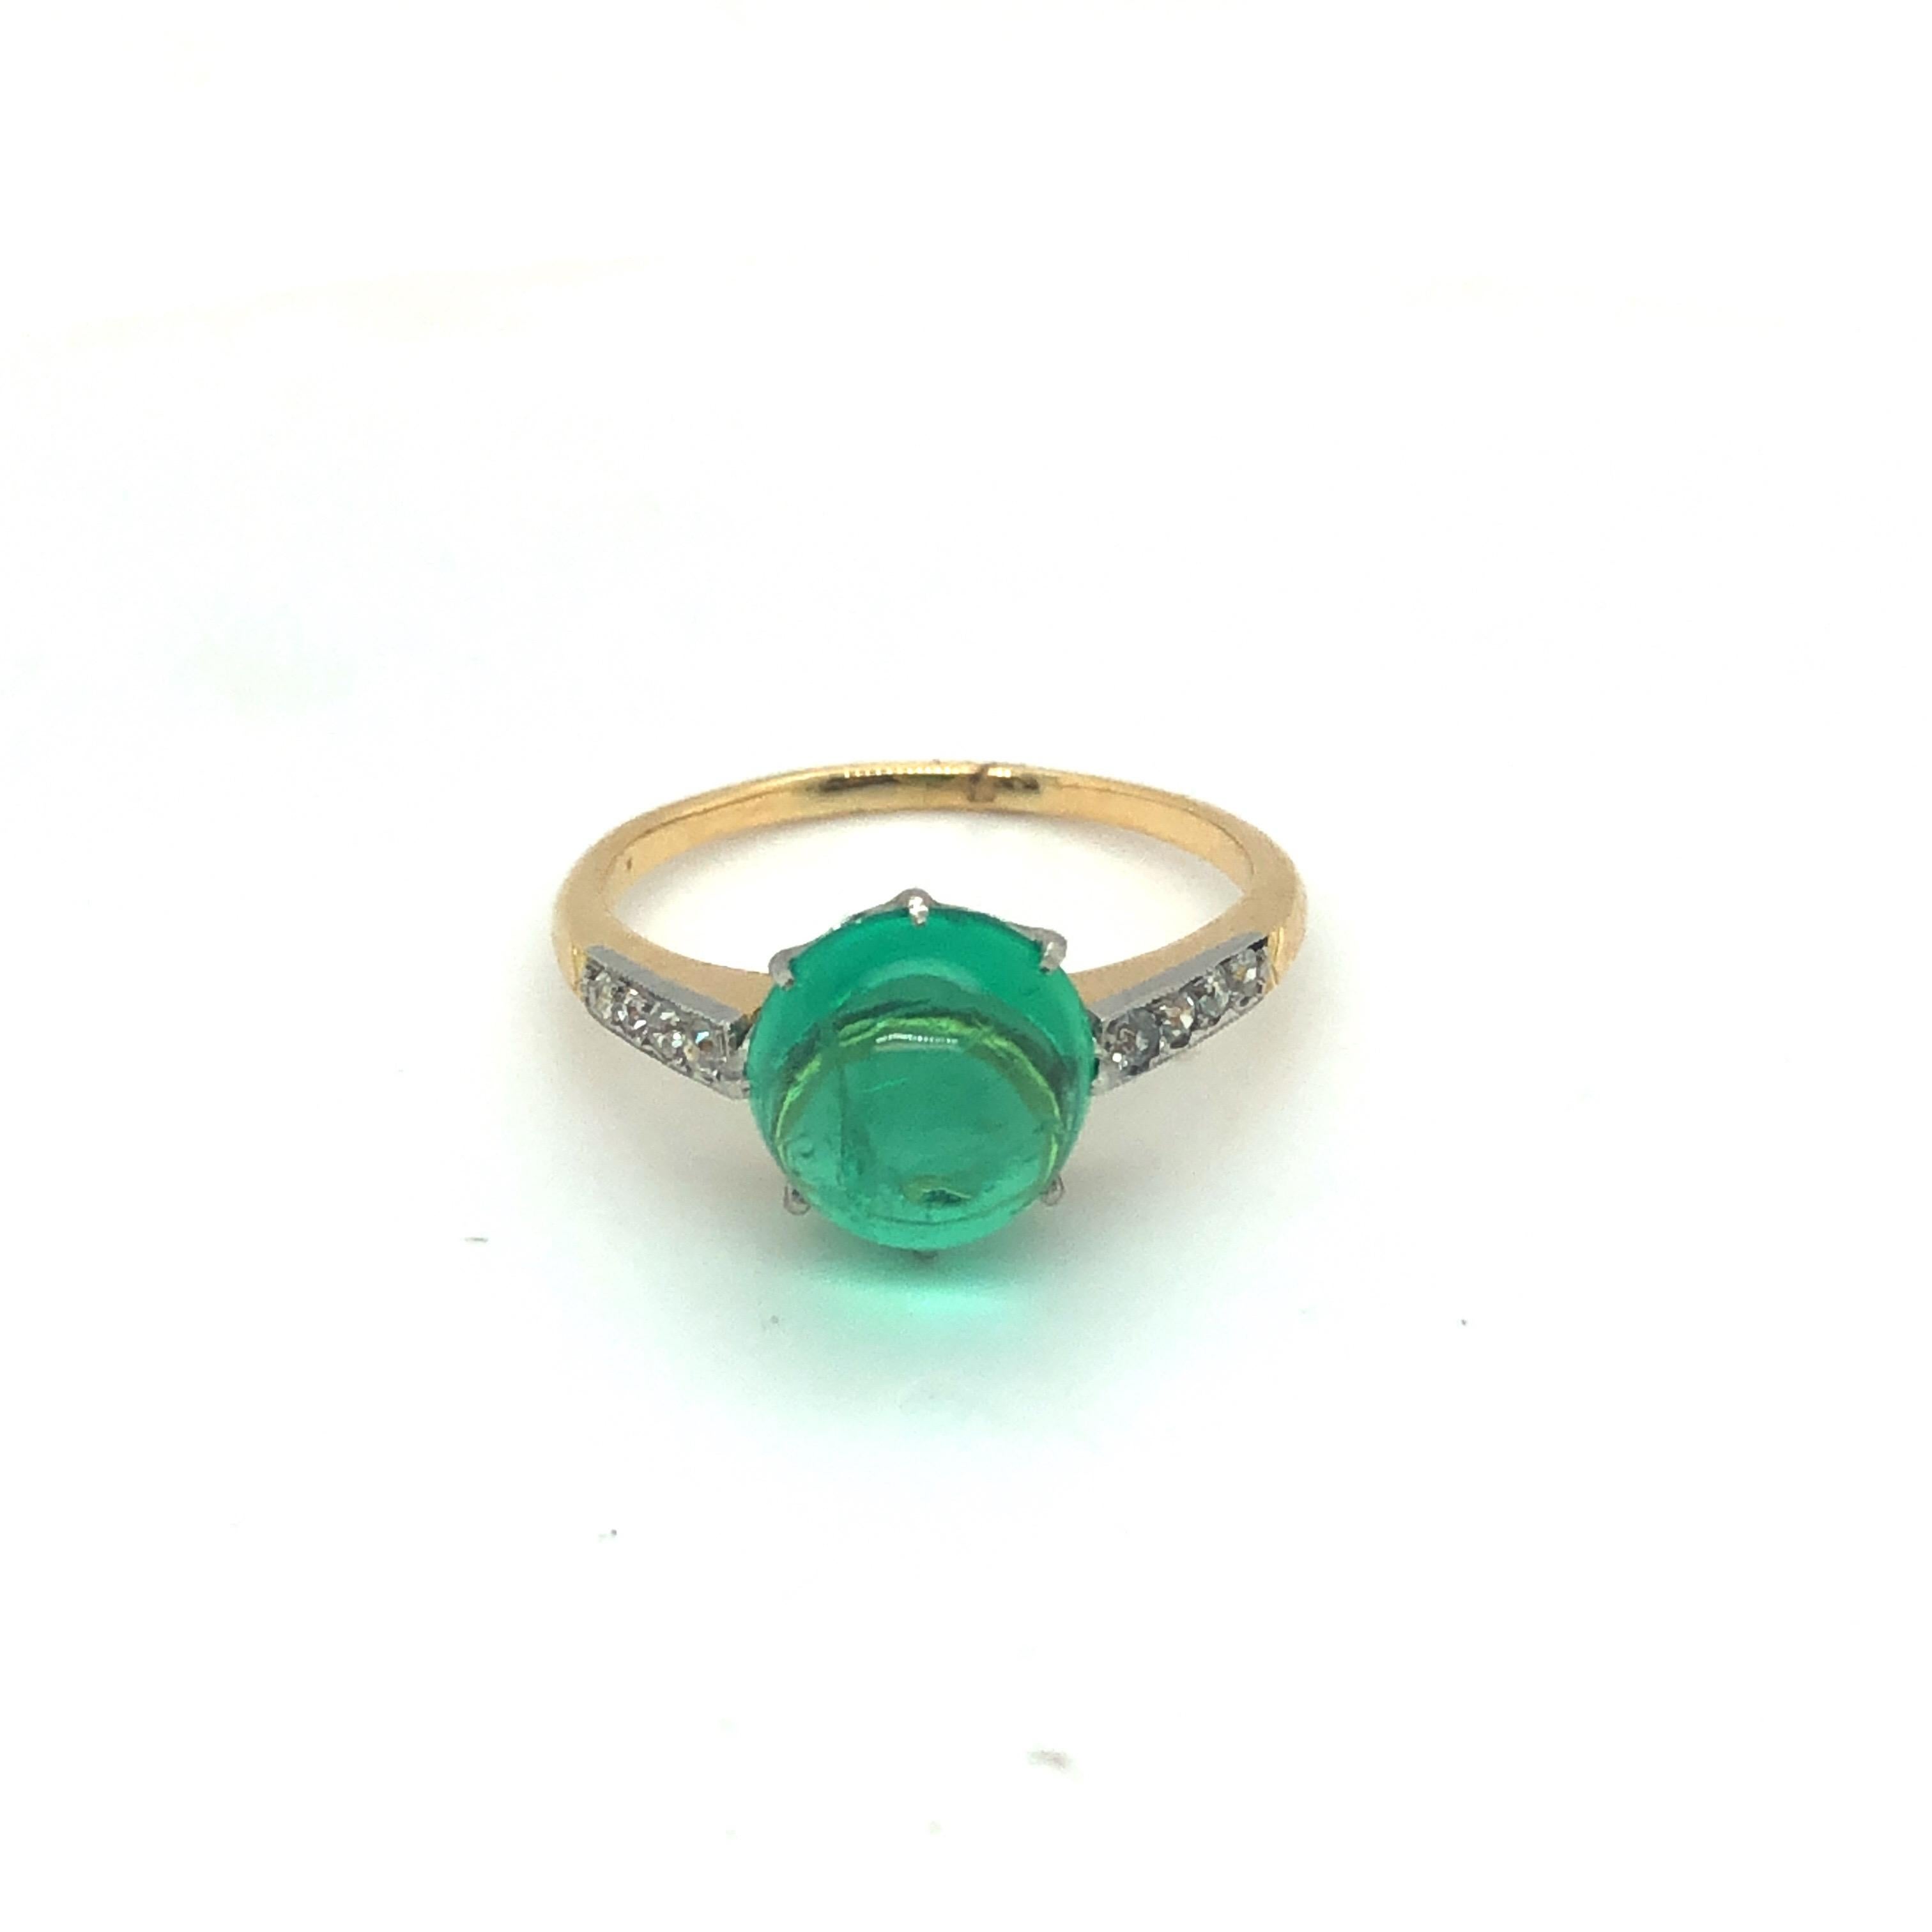 Exquisite 18 karat yellow gold, platinum, emerald and diamond ring, circa 1905.

This delicate ring is crafted in 18 karat yellow gold and platinum, centering upon a luminous Colombian emerald cabochon of circa 3.8 carats, flanked by 8 old-cut